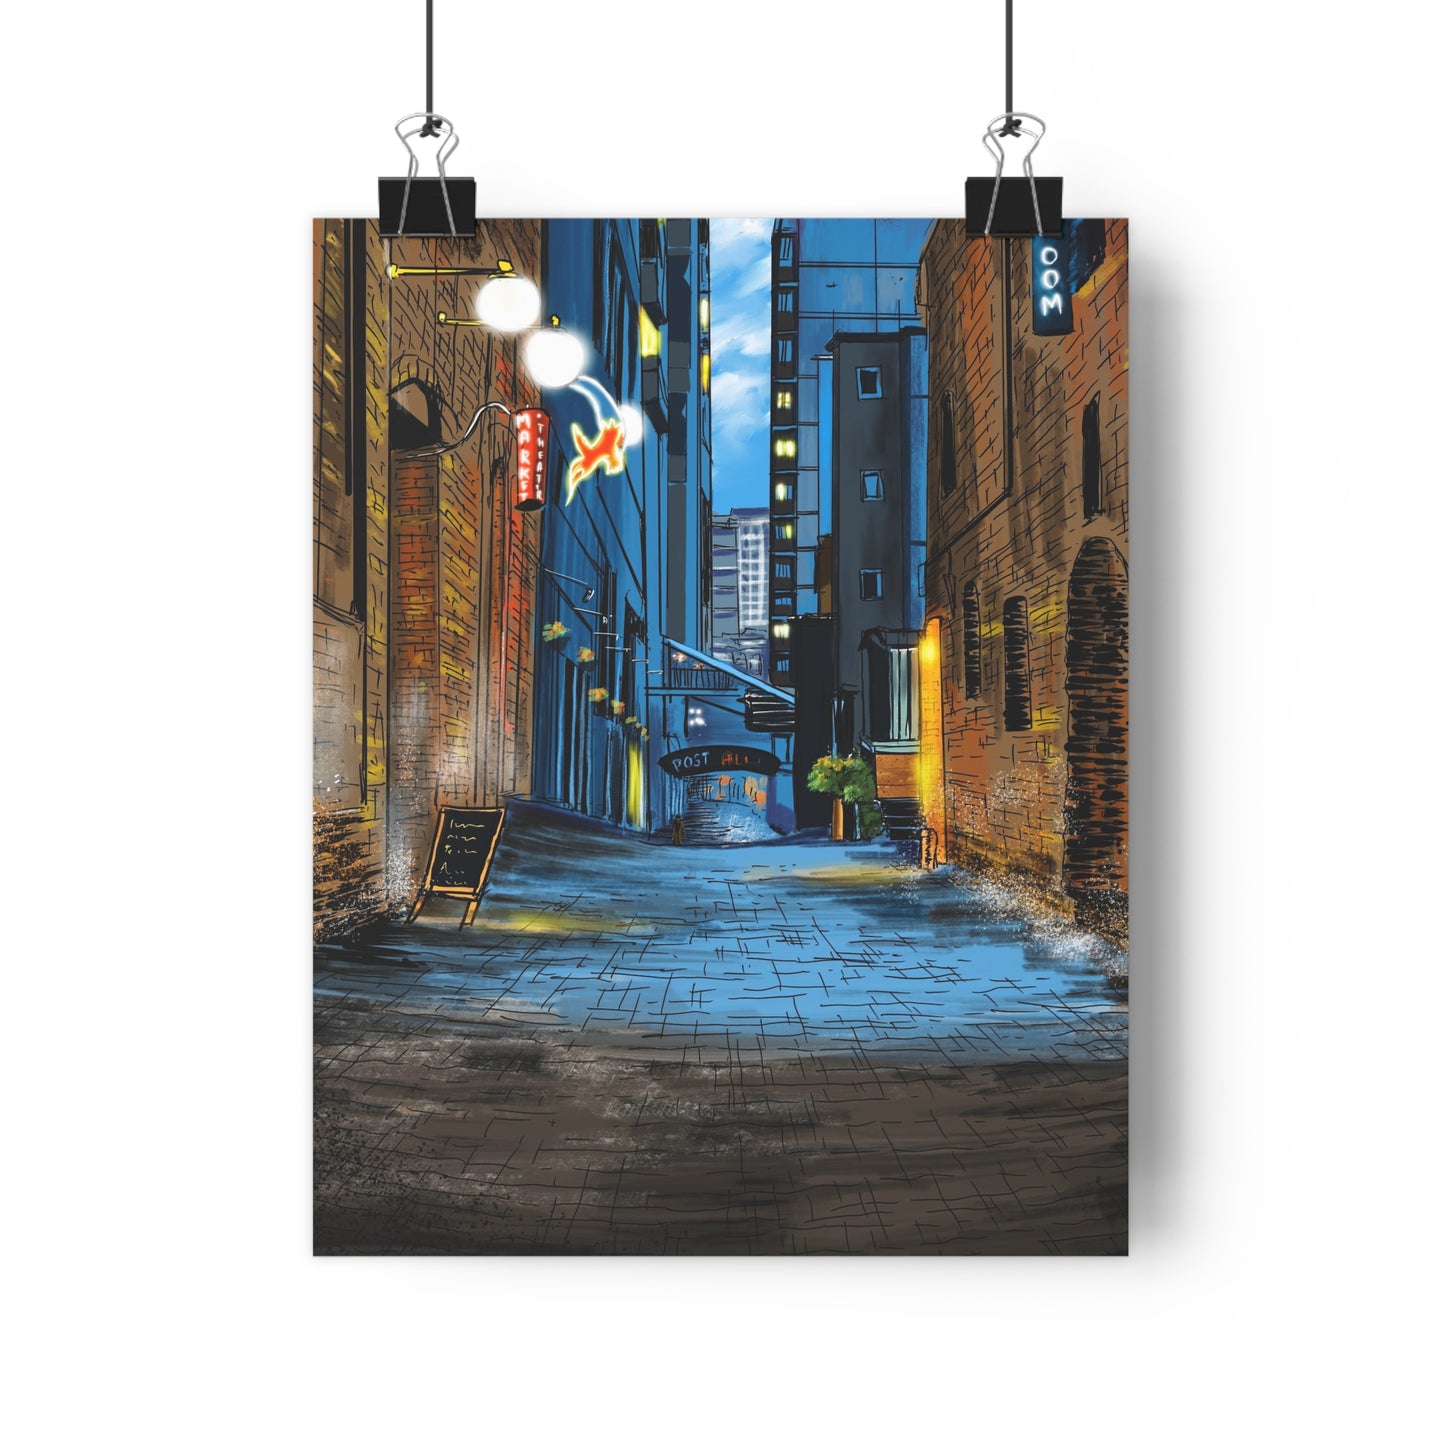 A Quiet Lane in a Busy City - Premium Poster